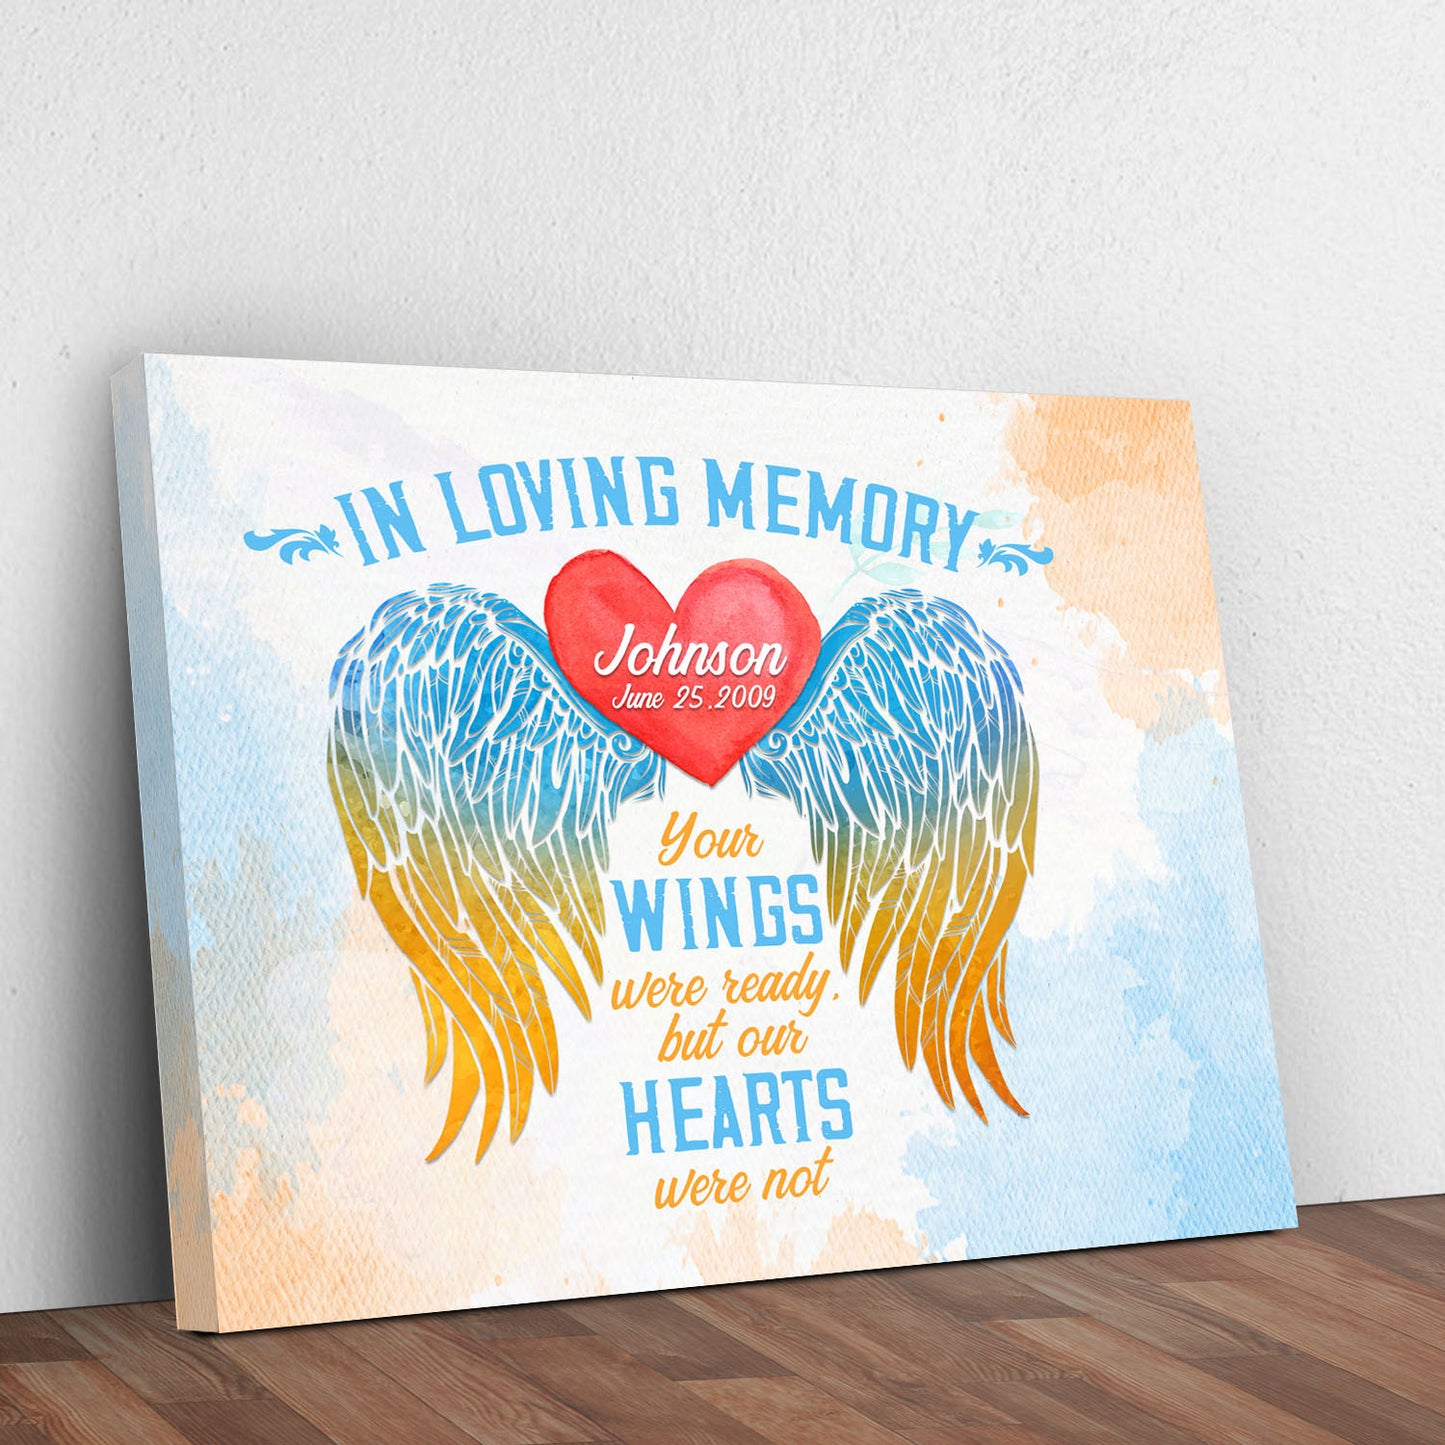 In Loving Memory Sign Style 1 - Image by Tailored Canvases